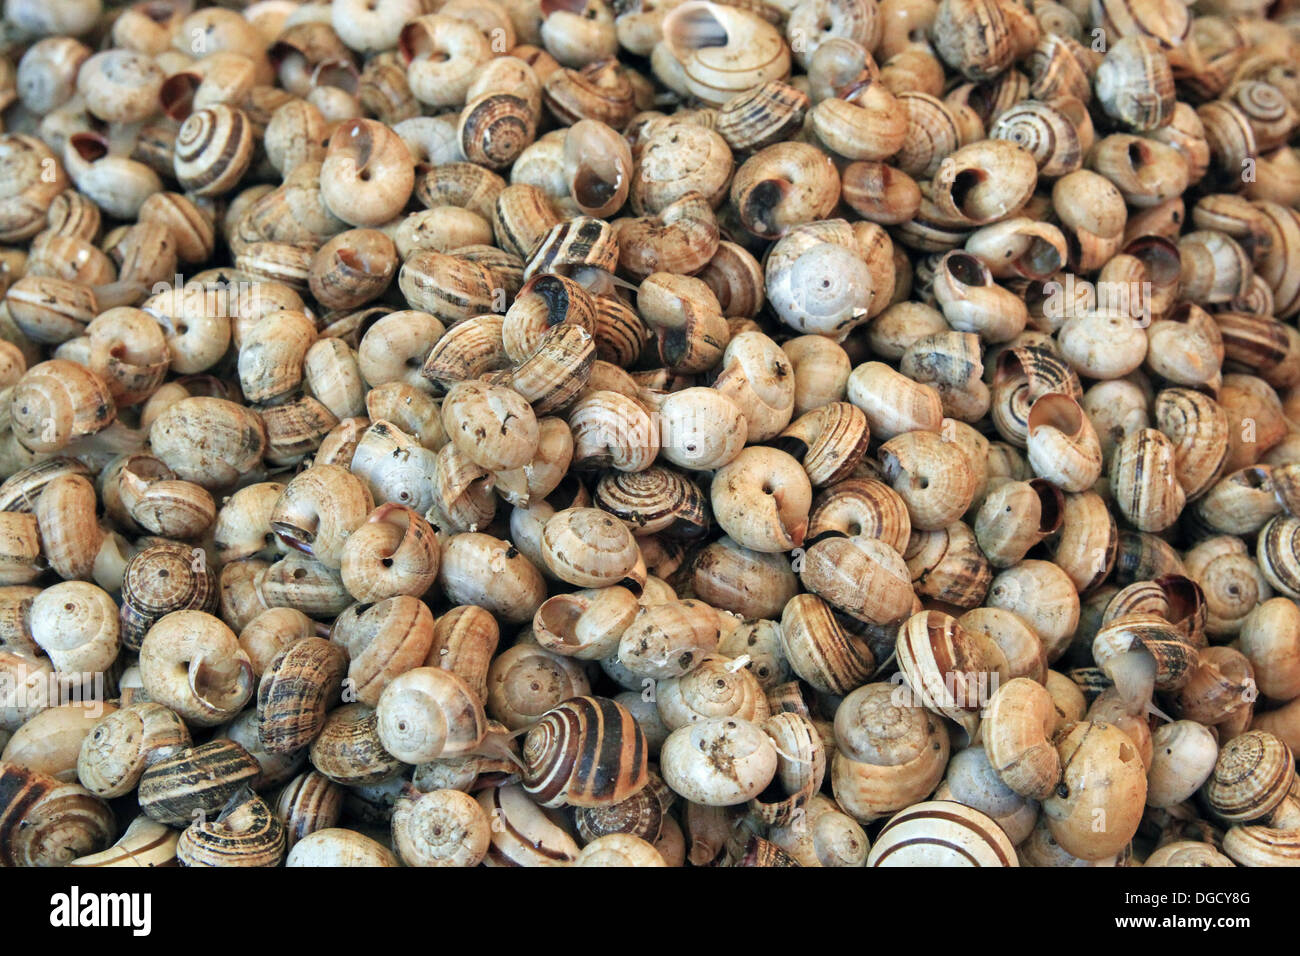 Whelks and snails for sale on a market stall. Stock Photo